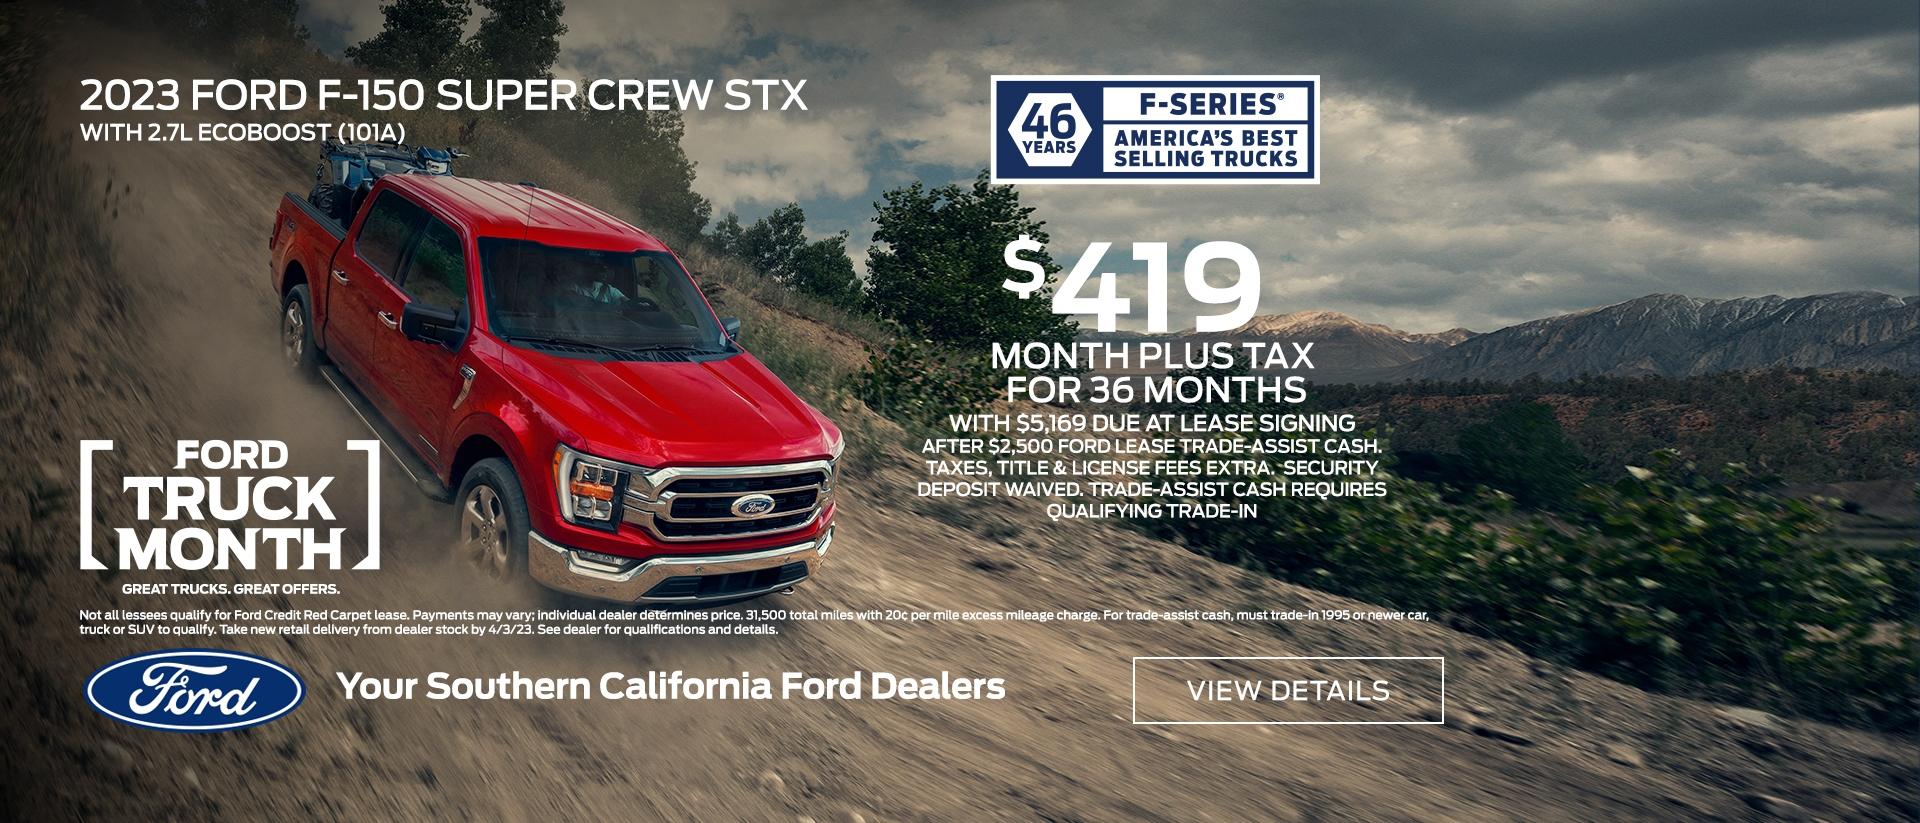 2023 Ford F-150 Lease Offer | Southern California Ford Dealers